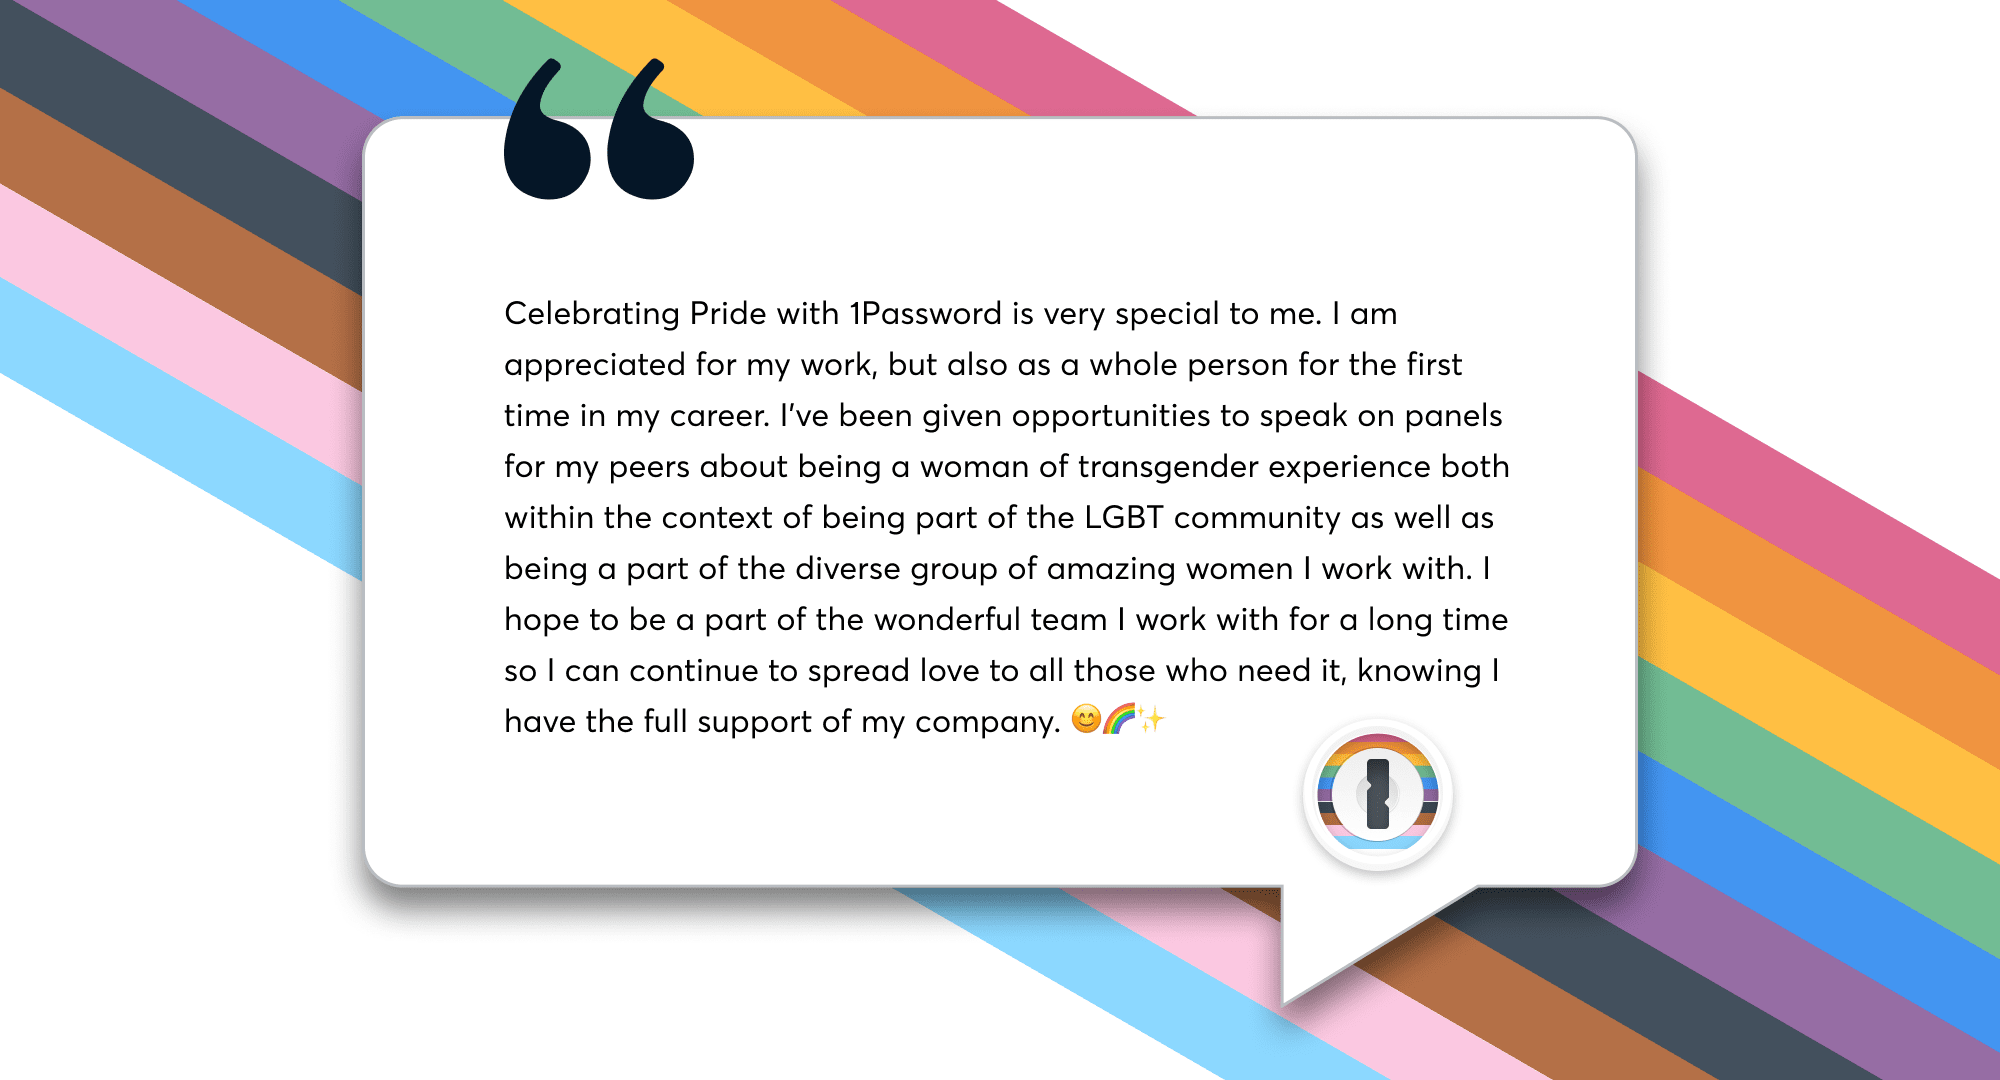 Quotation from a 1Password employee— Celebrating Pride with 1Password is very special to me. I am appreciated for my work, but also as a whole person for the first time in my career.